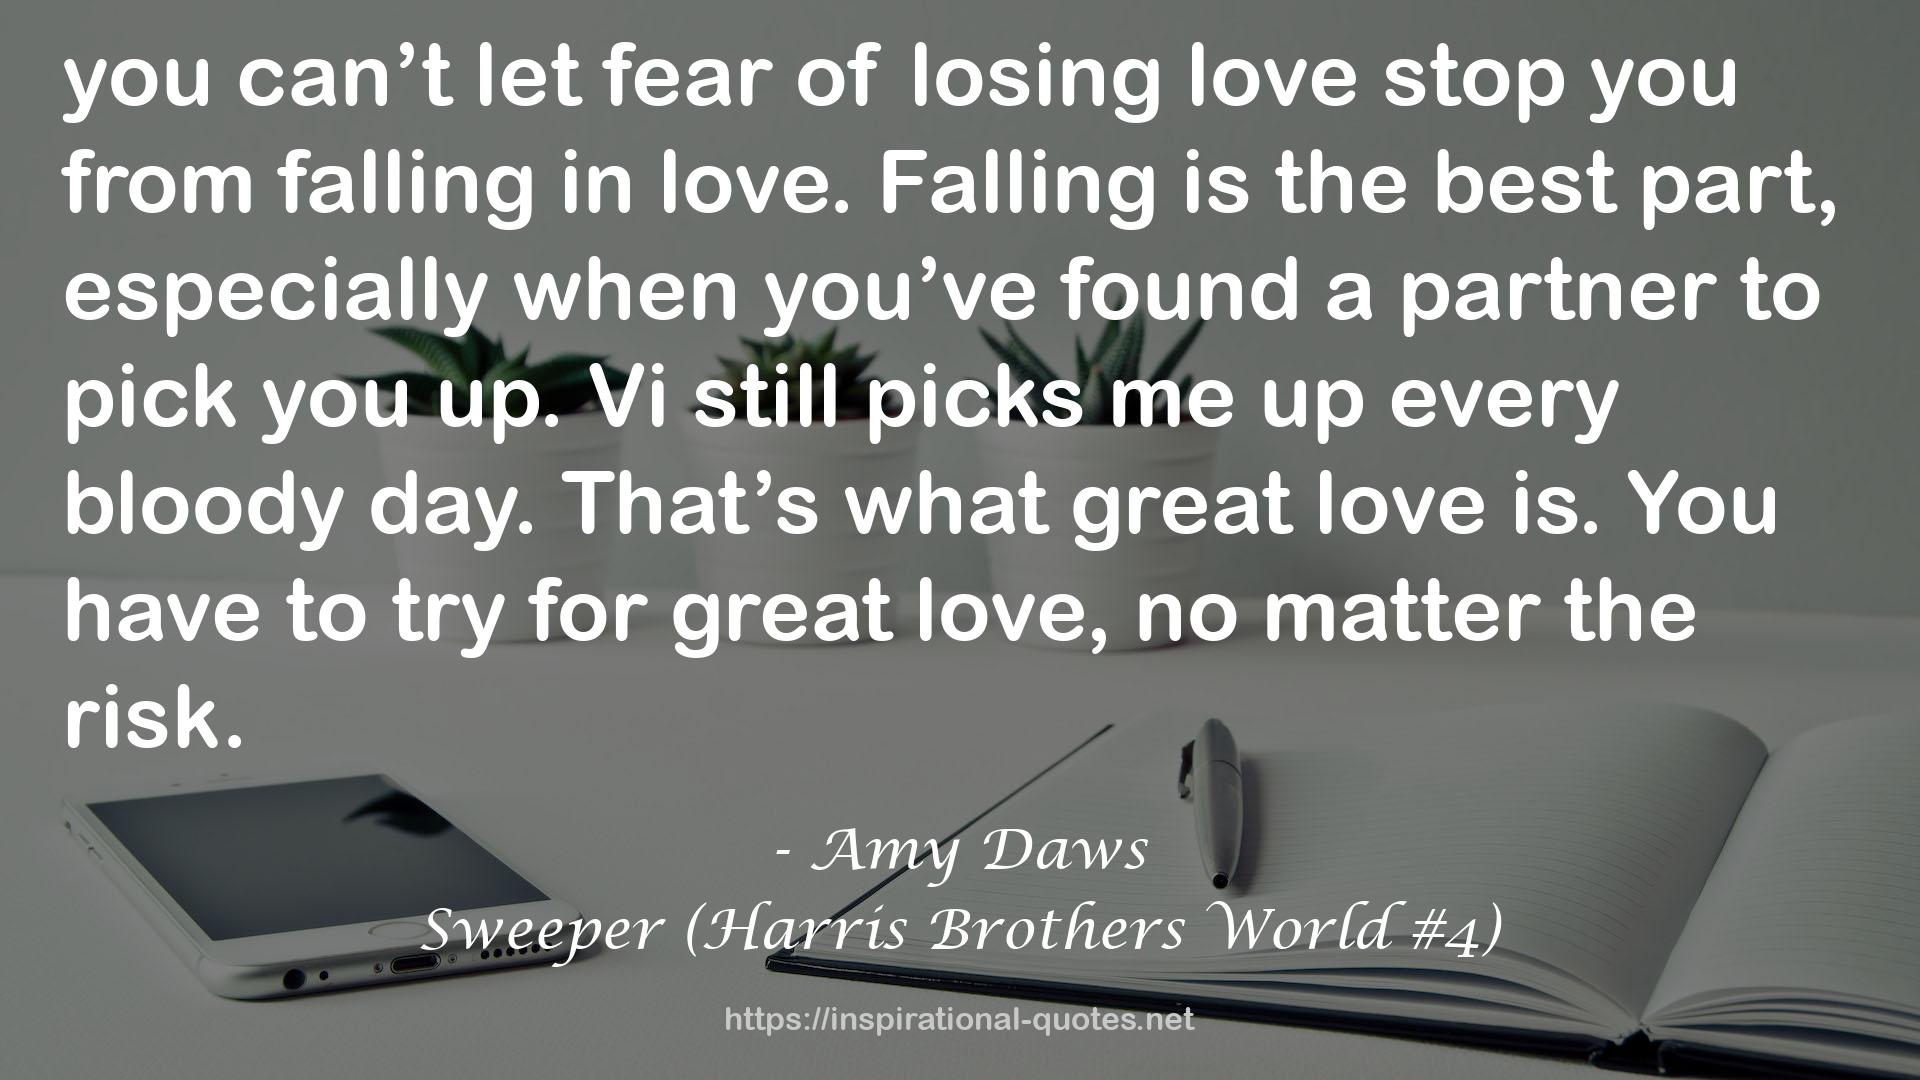 Sweeper (Harris Brothers World #4) QUOTES